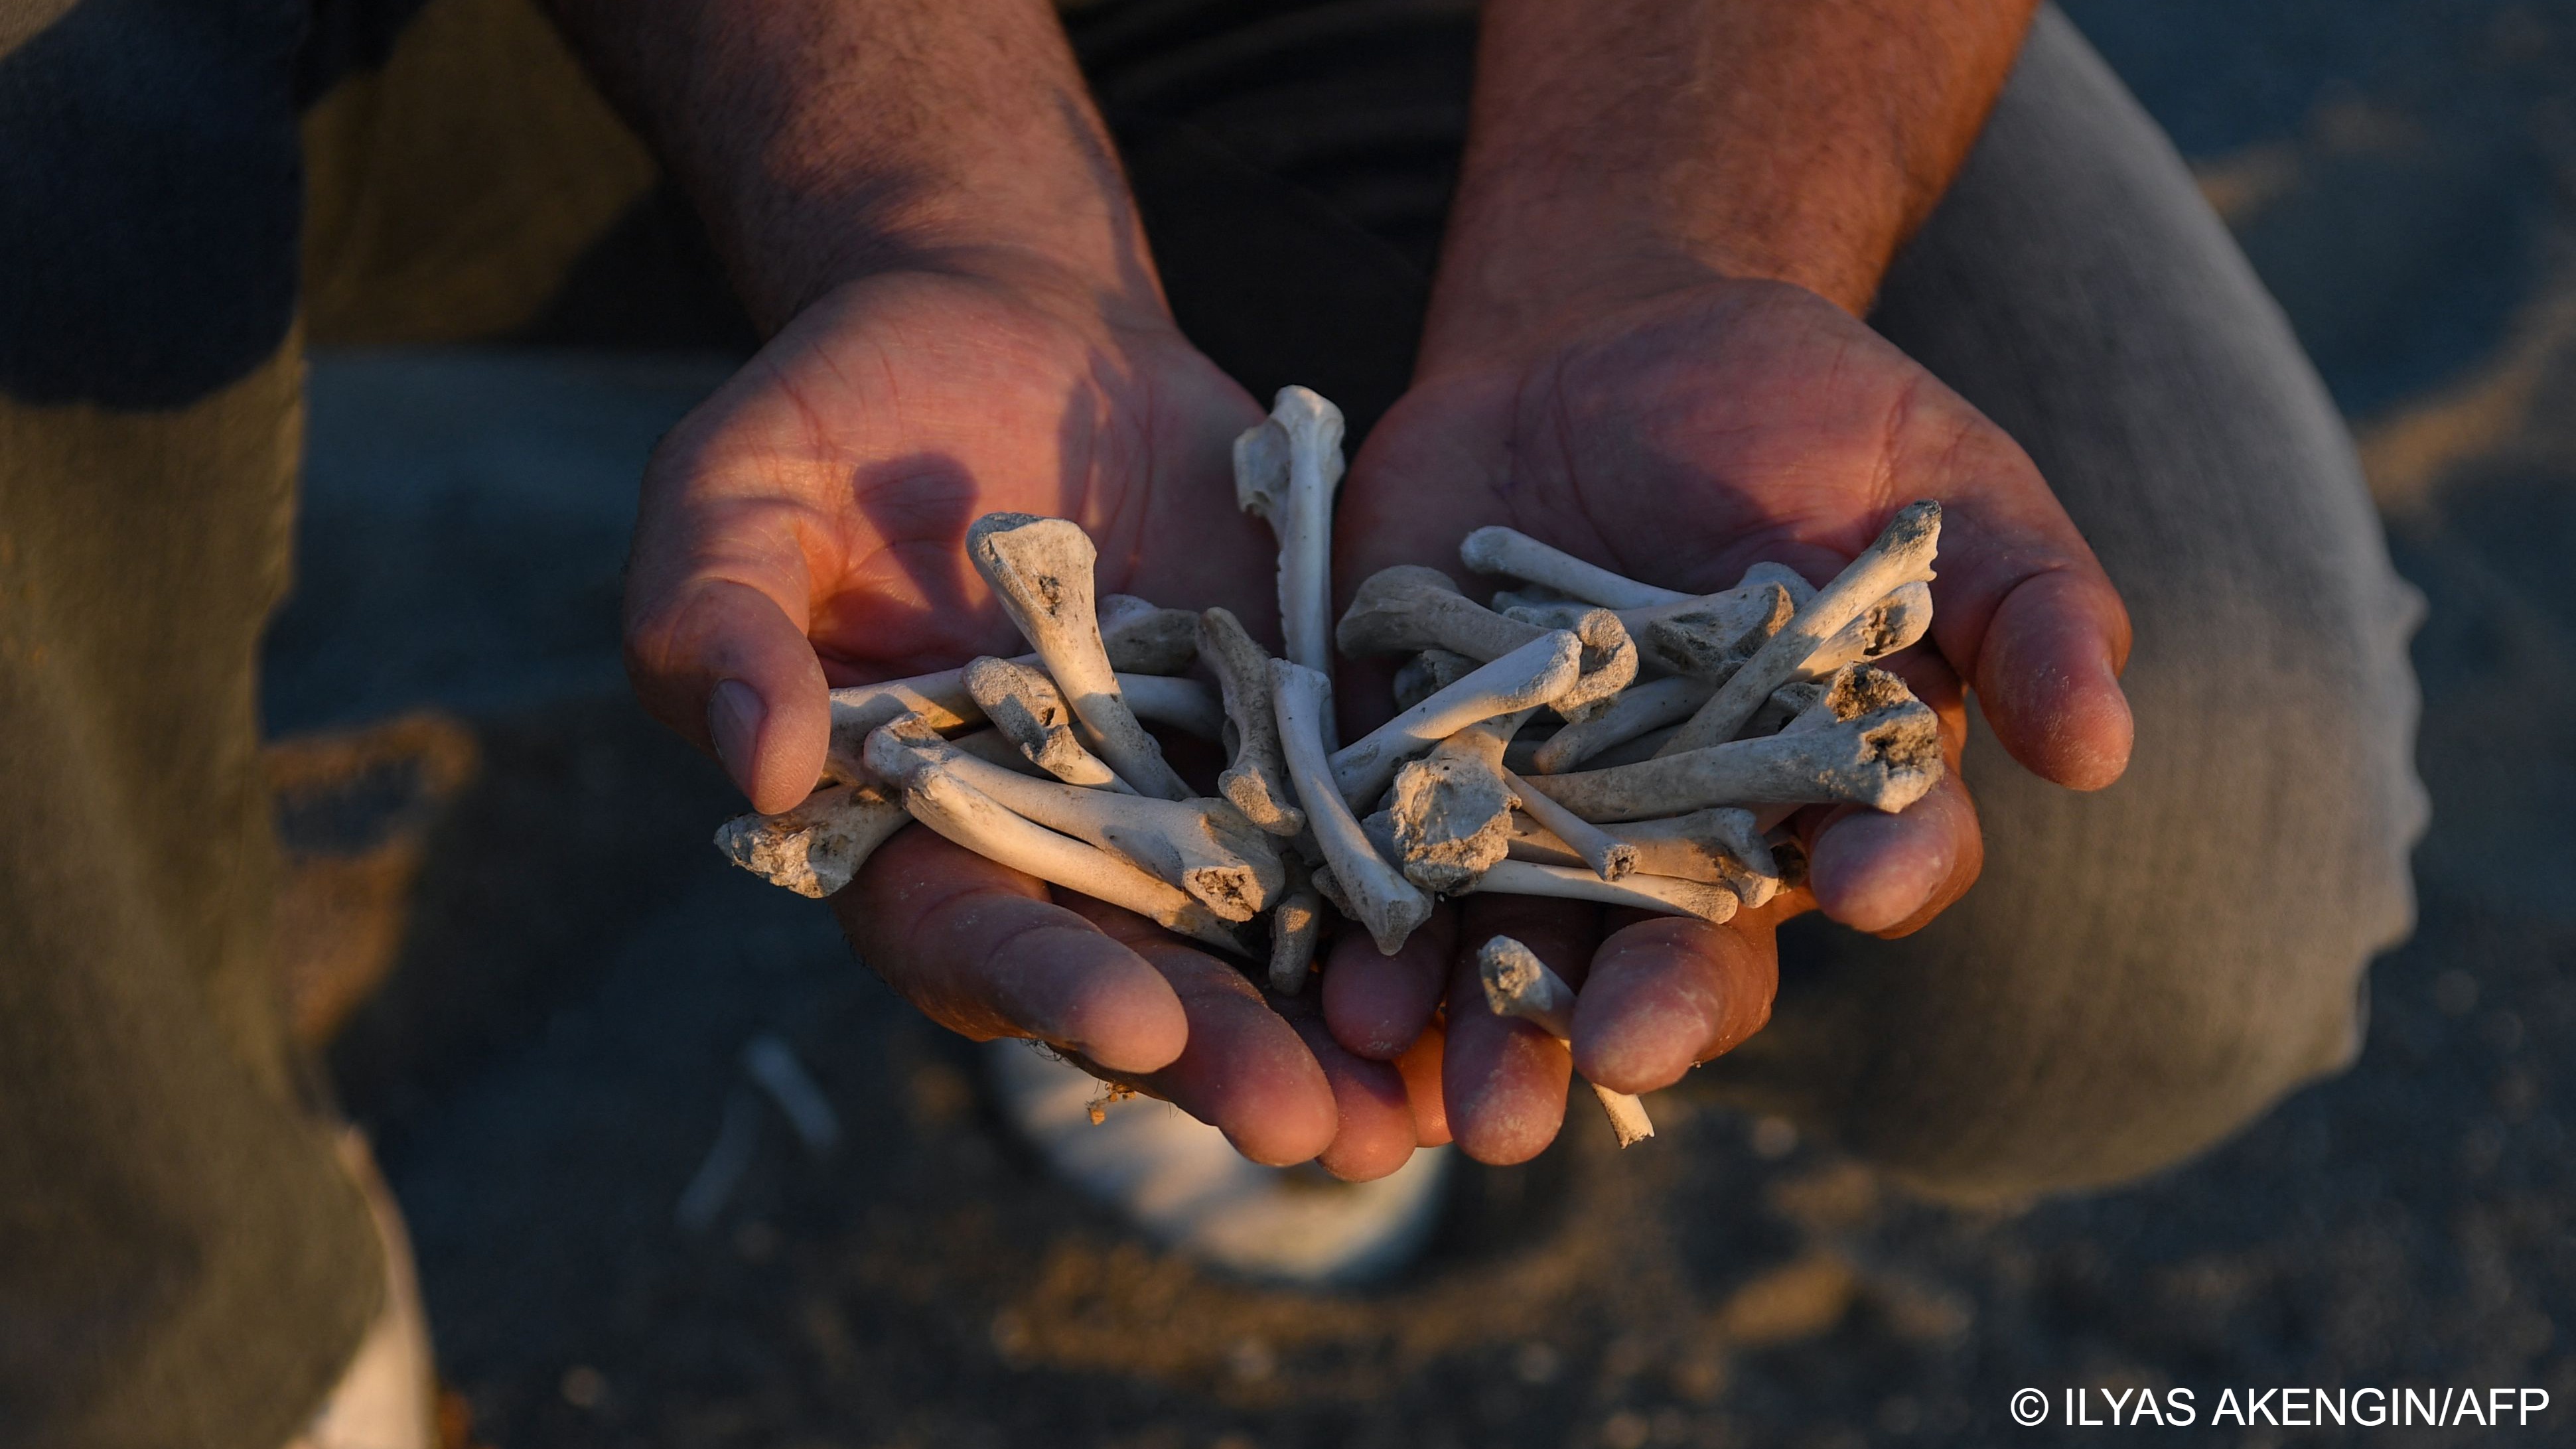 Kalcik holds bones of birds that starved to death in his cupped hands (image: ILYAS AKENGIN/AFP)